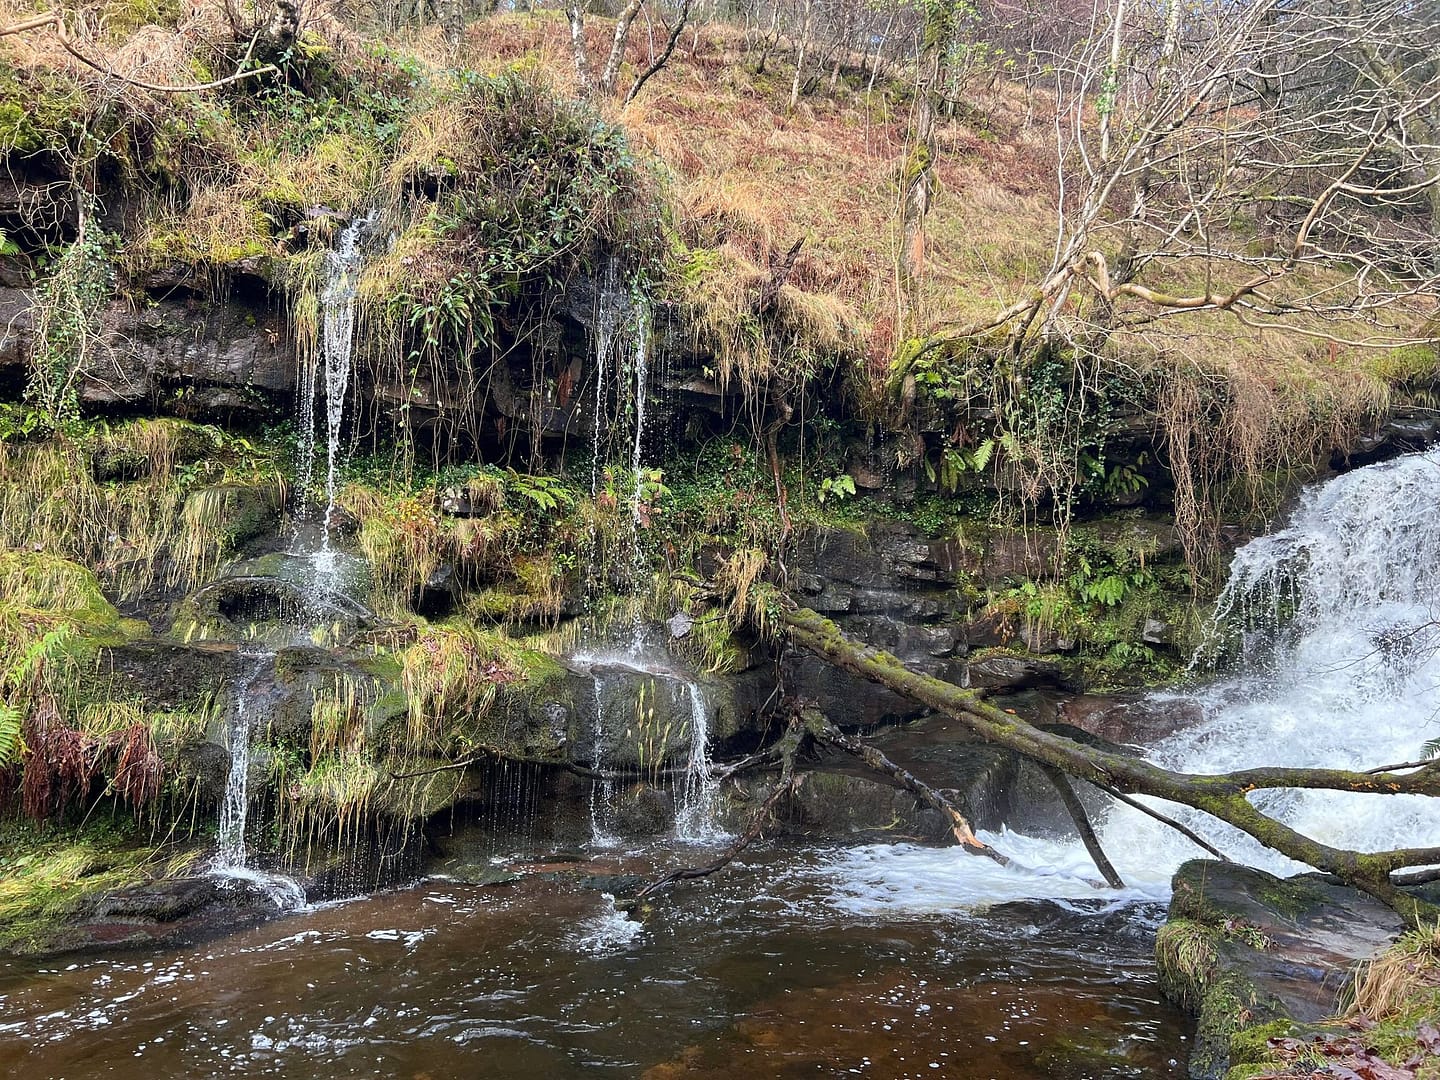 Natural watercourse draining down mountain with waterfall and planted embankment